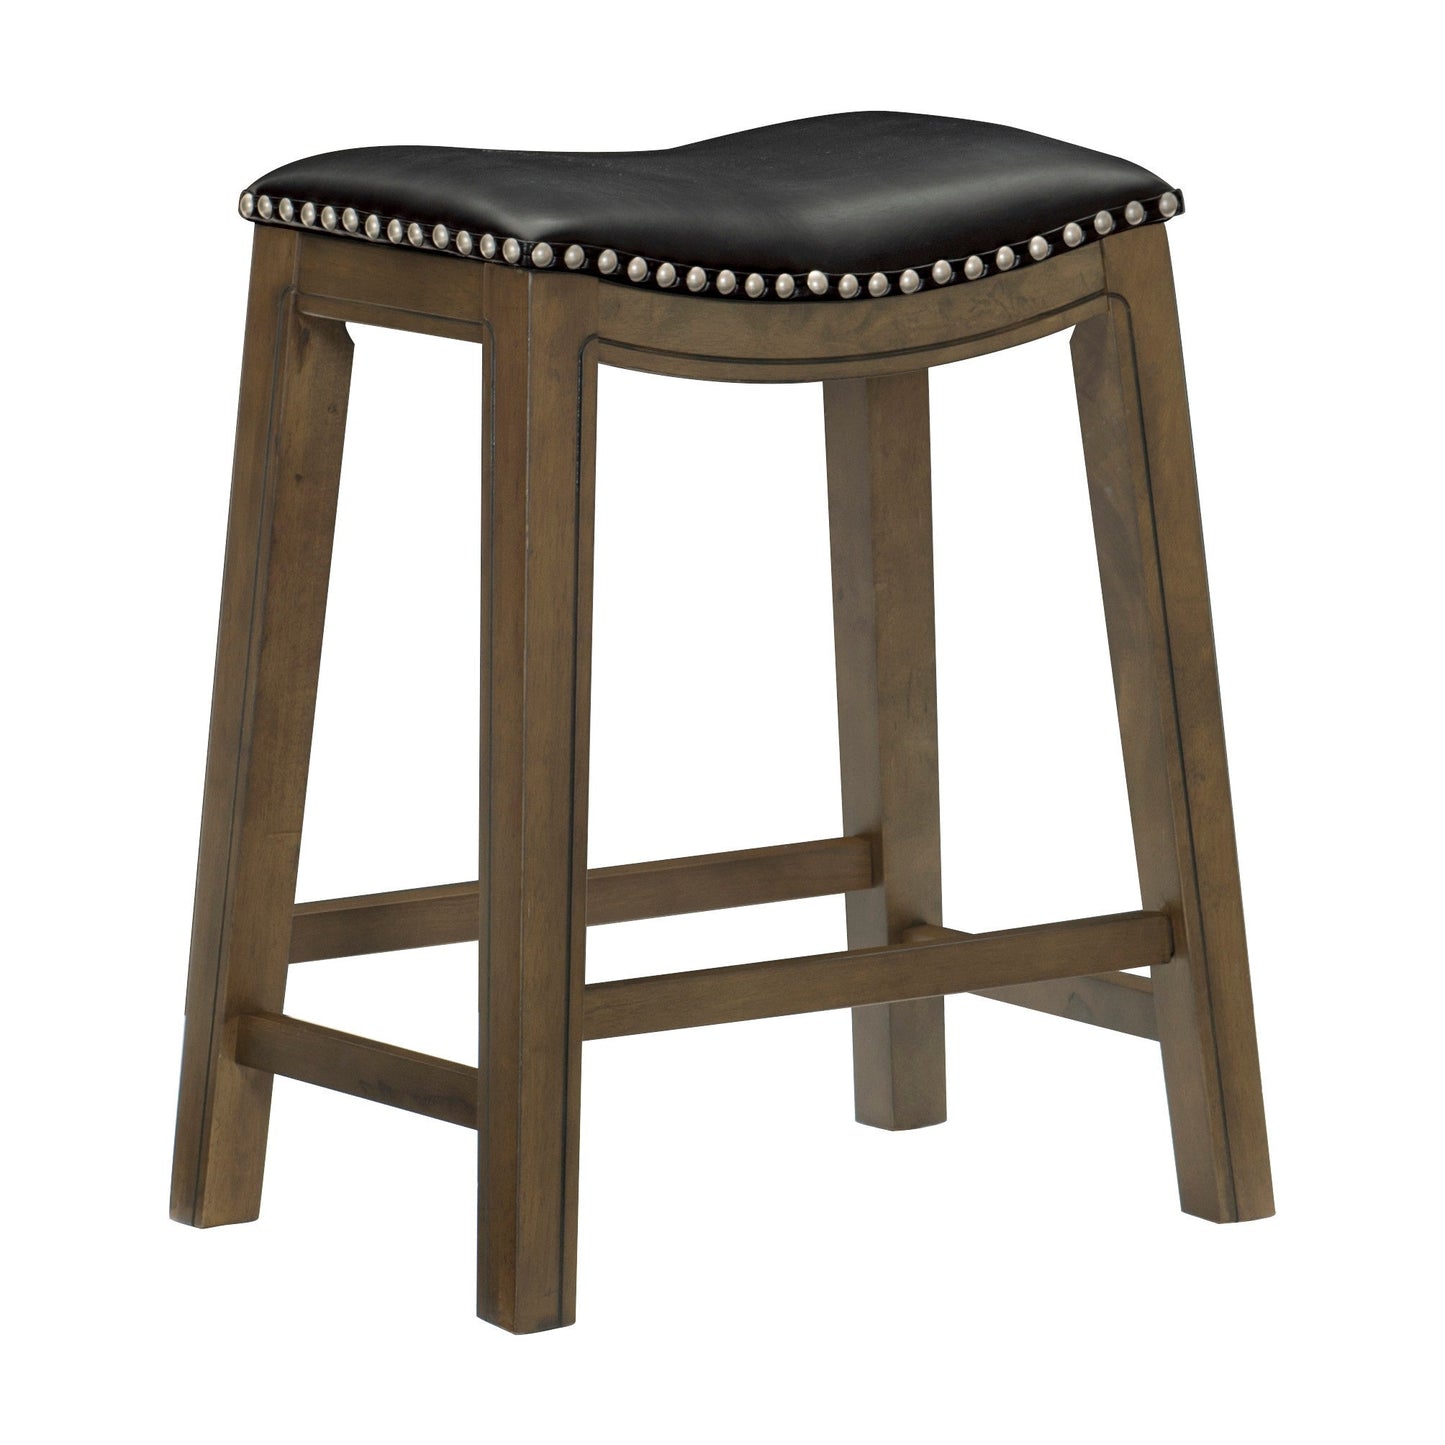 Ordway Black/Brown Counter Height Stool, Black